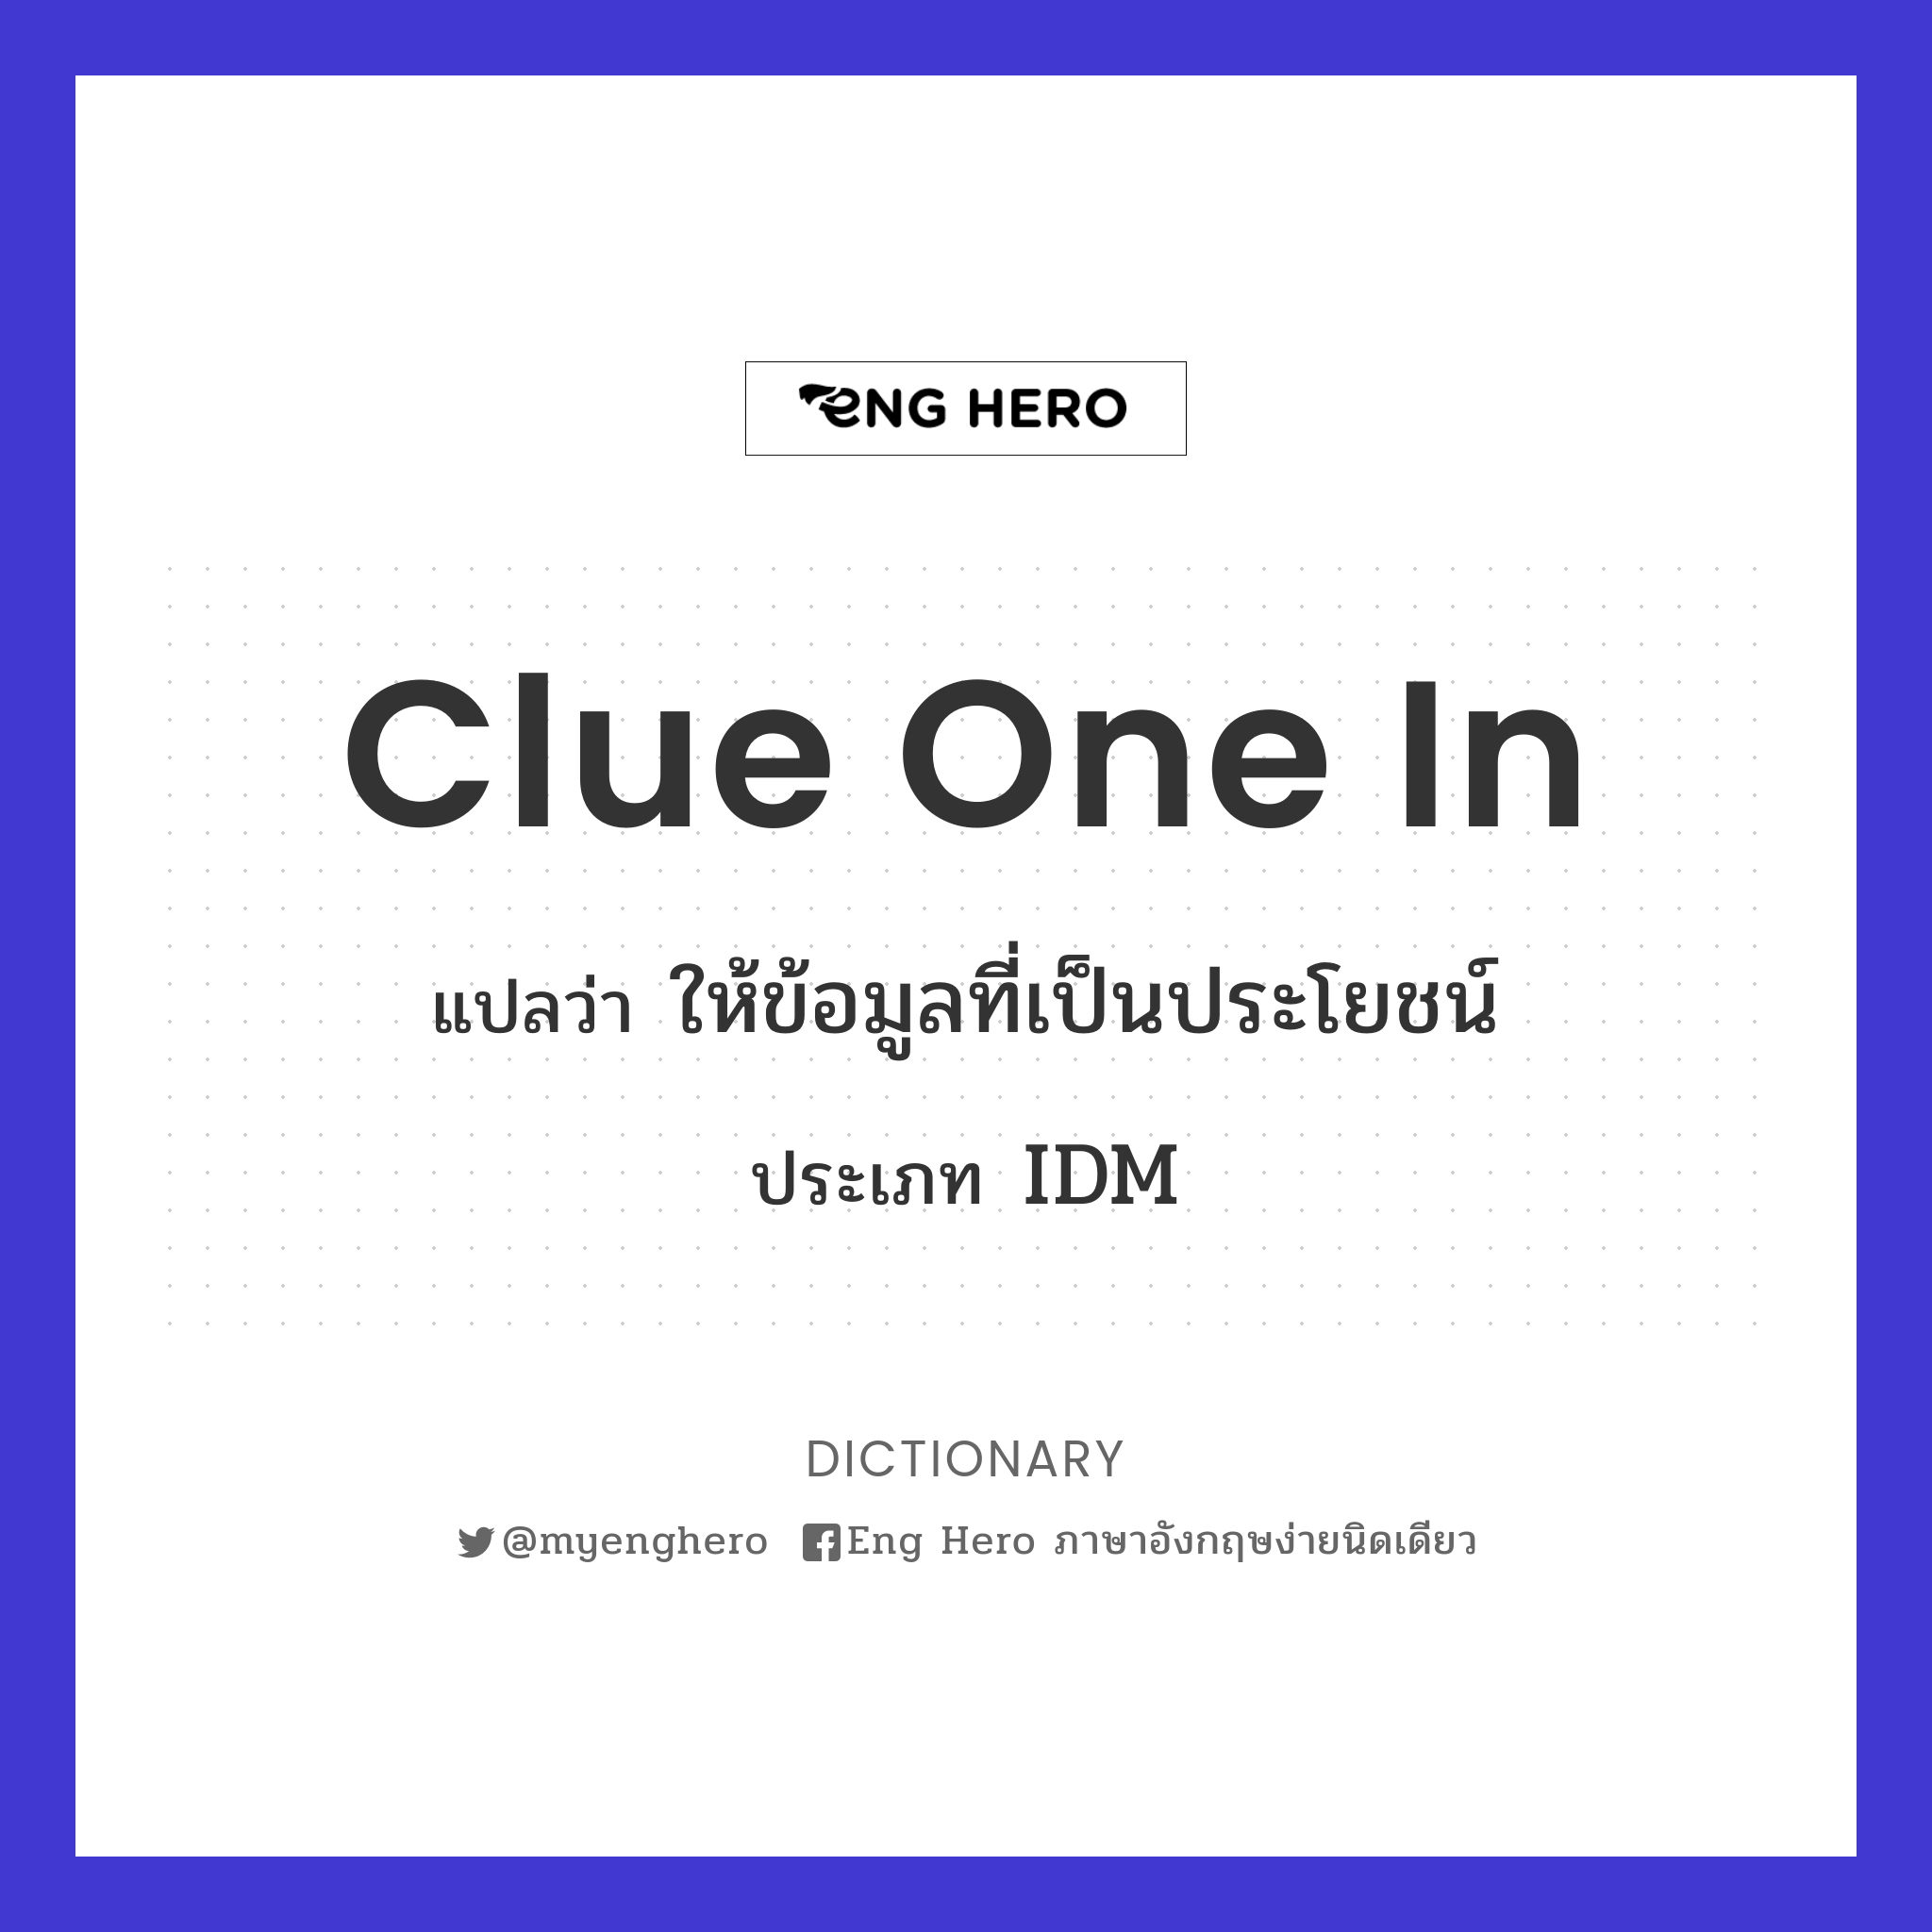 clue one in